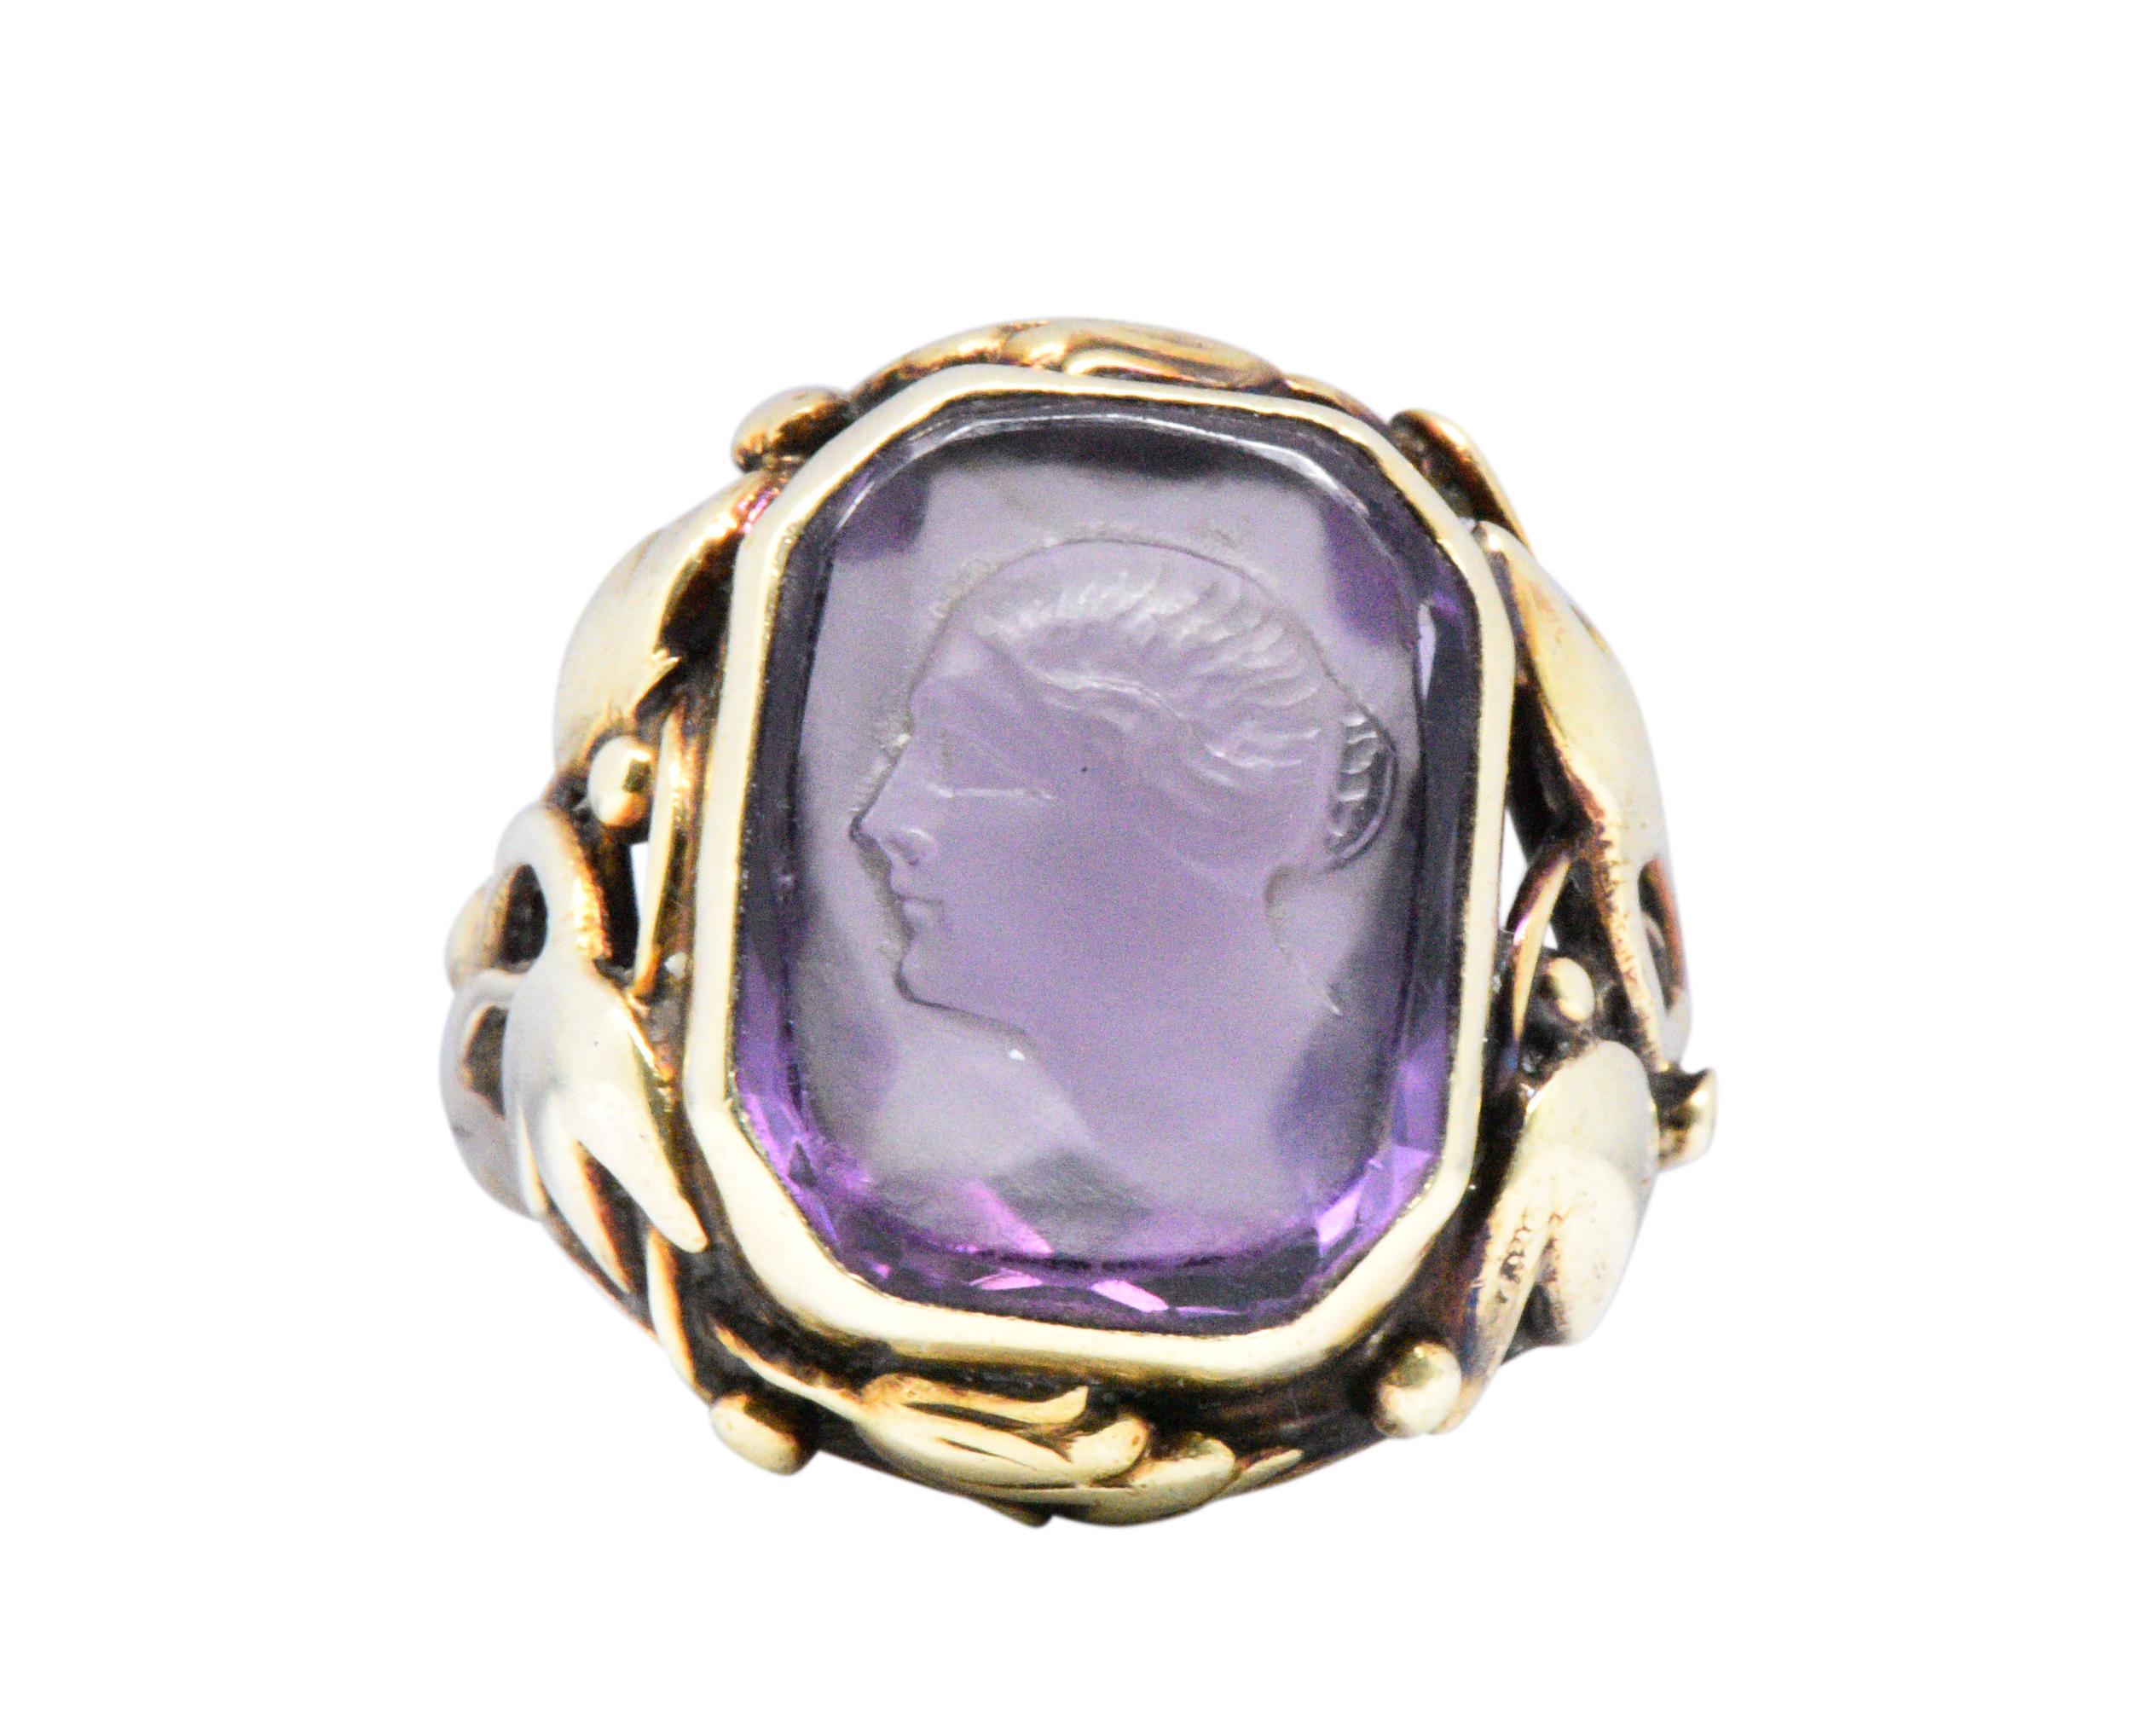 Centering a cut-corner amethyst measuring 15.5 x 11.6 mm, carved depicting the profile of a woman, facing left, wonderfully detailed, you can see her hair combed into a bun

Bezel set with a foliate motif setting, in lovely green gold, wrapping